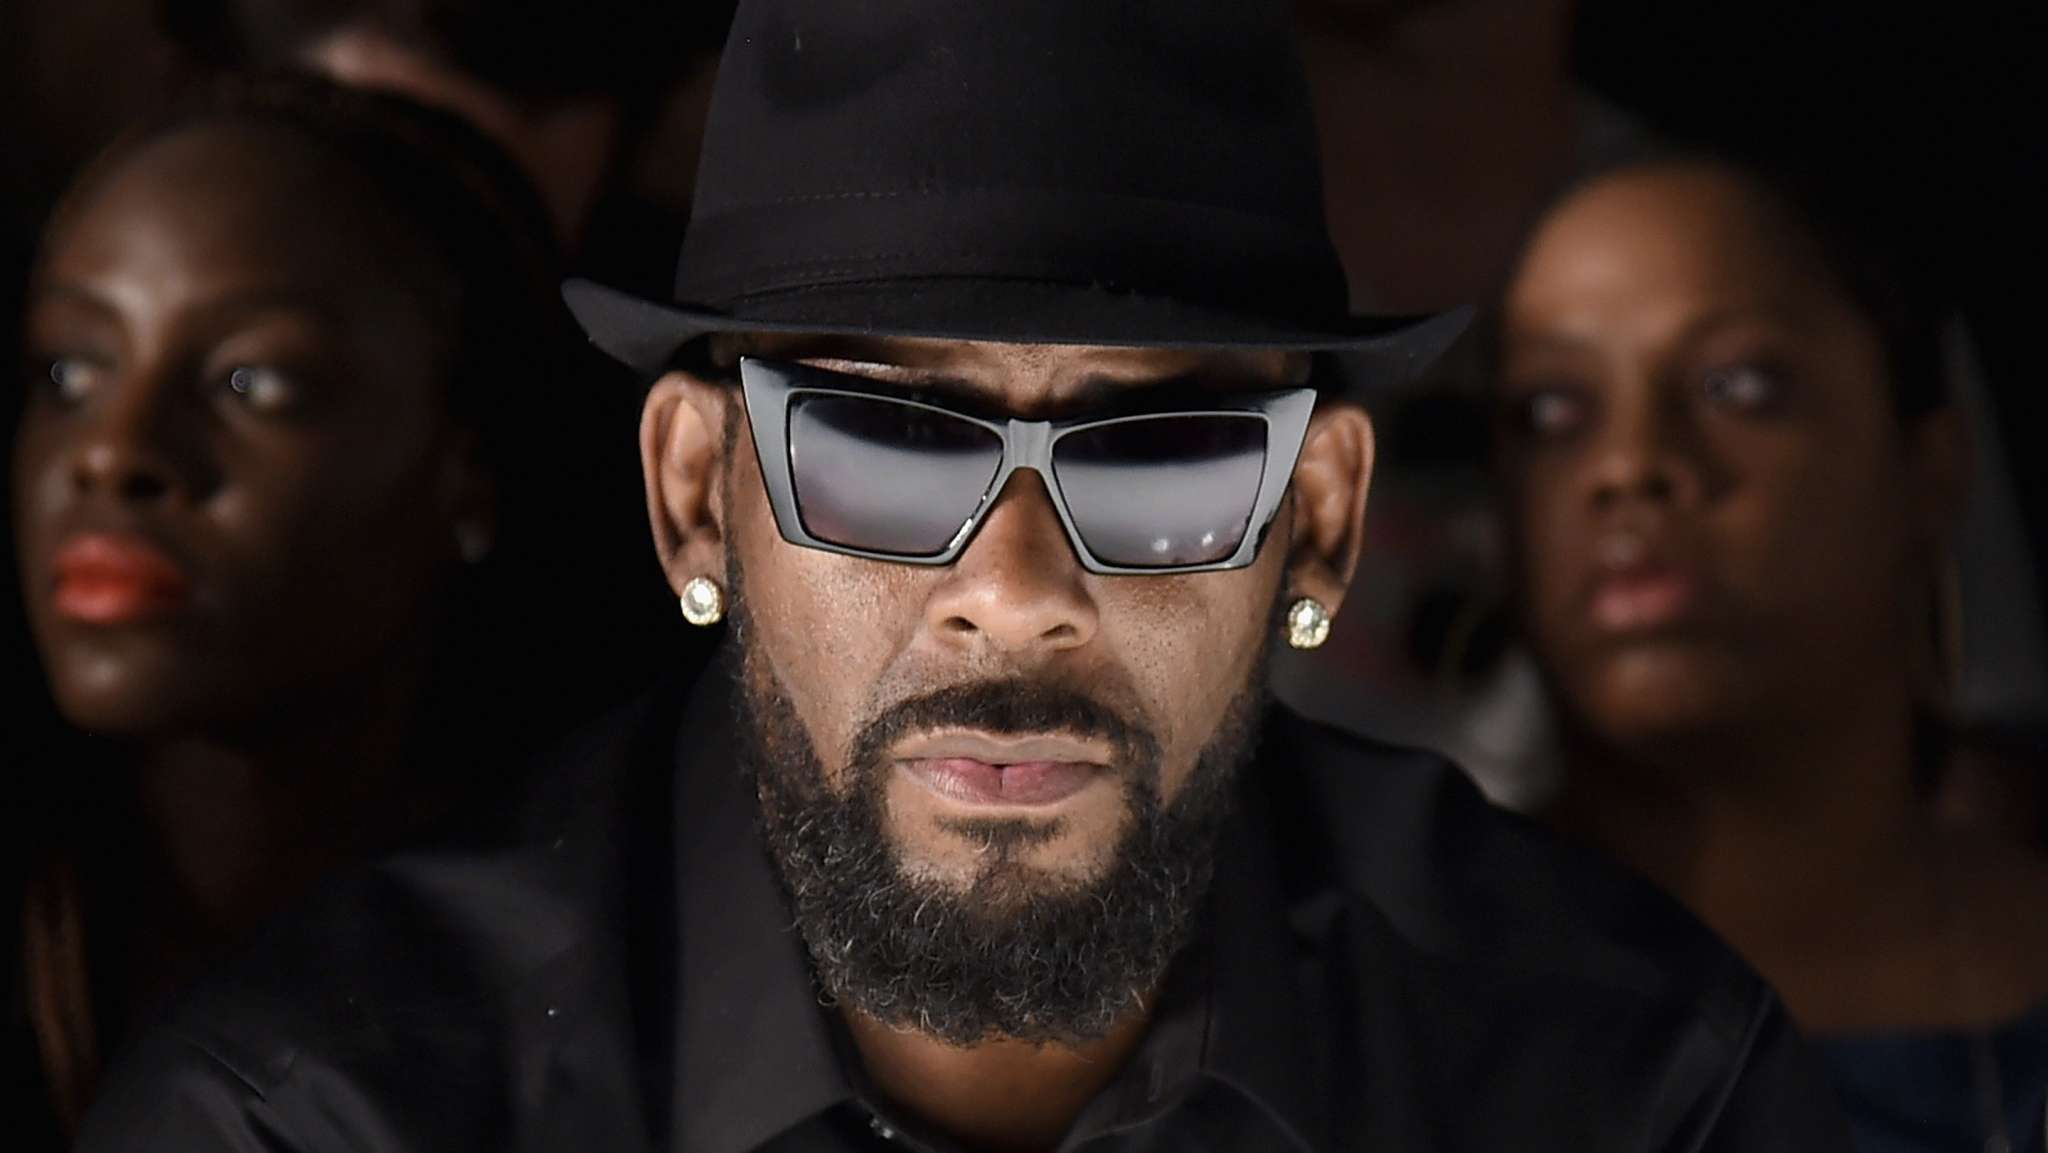 R. Kelly Is Reportedly Disgusted By The Docuseries And Believes It's All A Vendetta Against Him